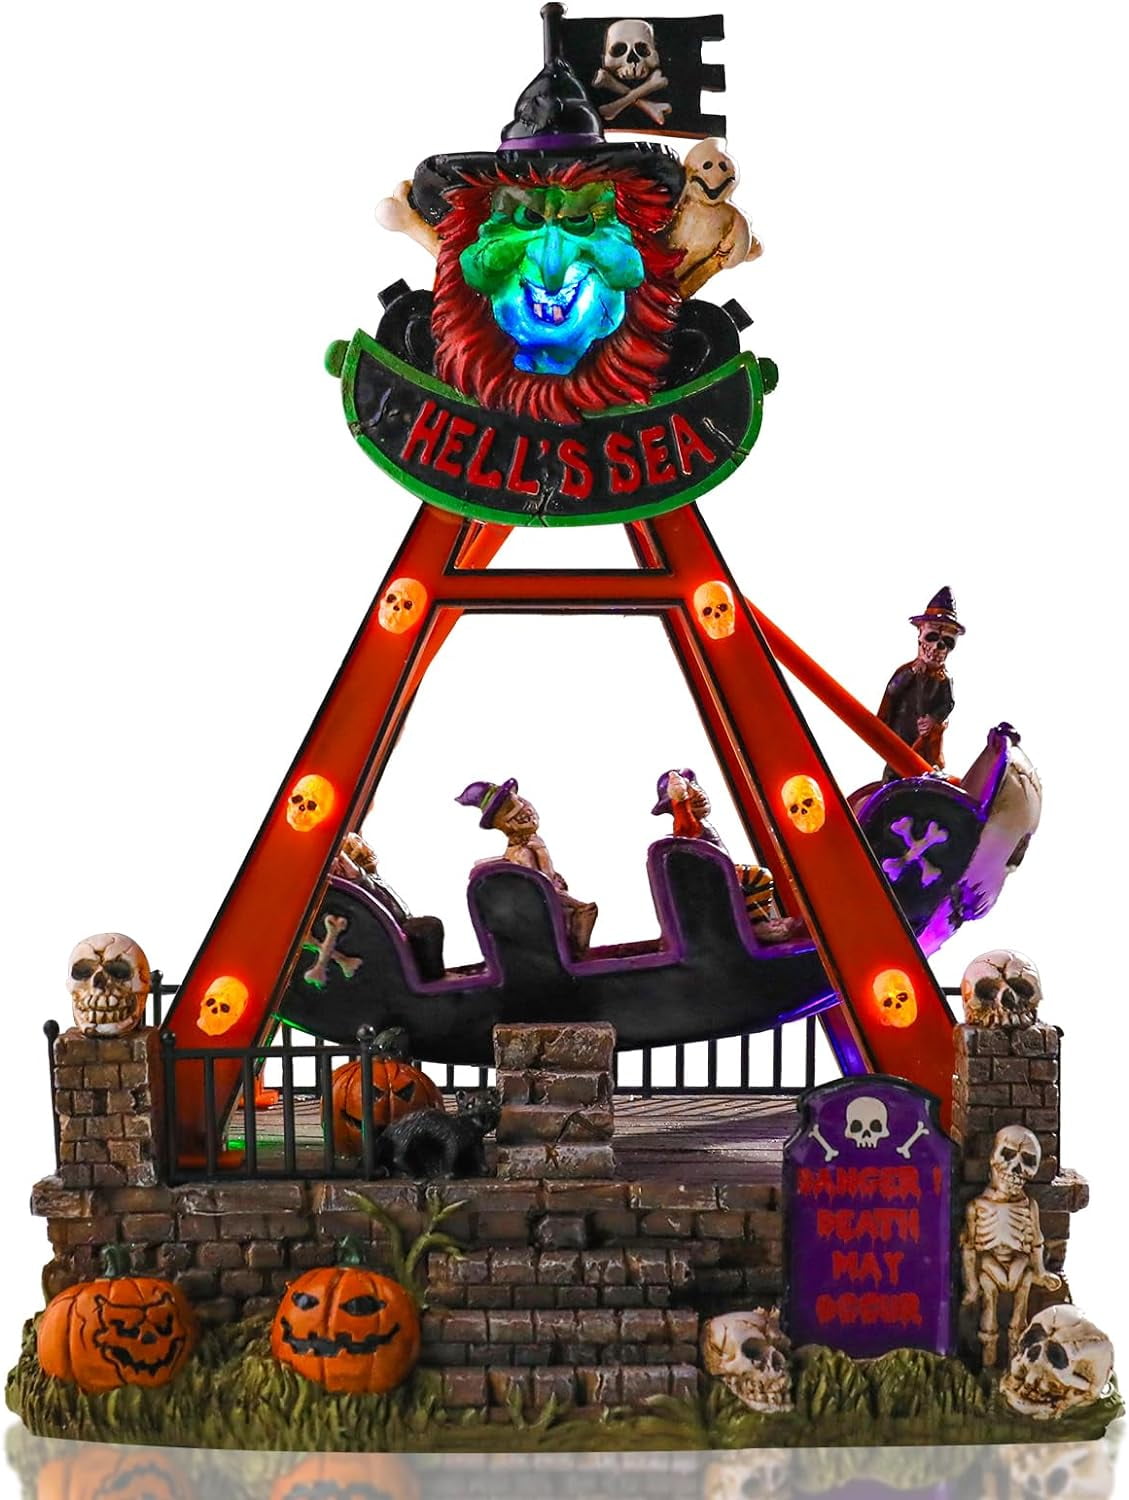 11.8 in Halloween Village Indoor Halloween Decorations Pirate Ship Musical  Hell's Sea Pendulum LED Swing with Skull Pumpkin Motion and Sound for  Indoor and Halloween Party Decor 